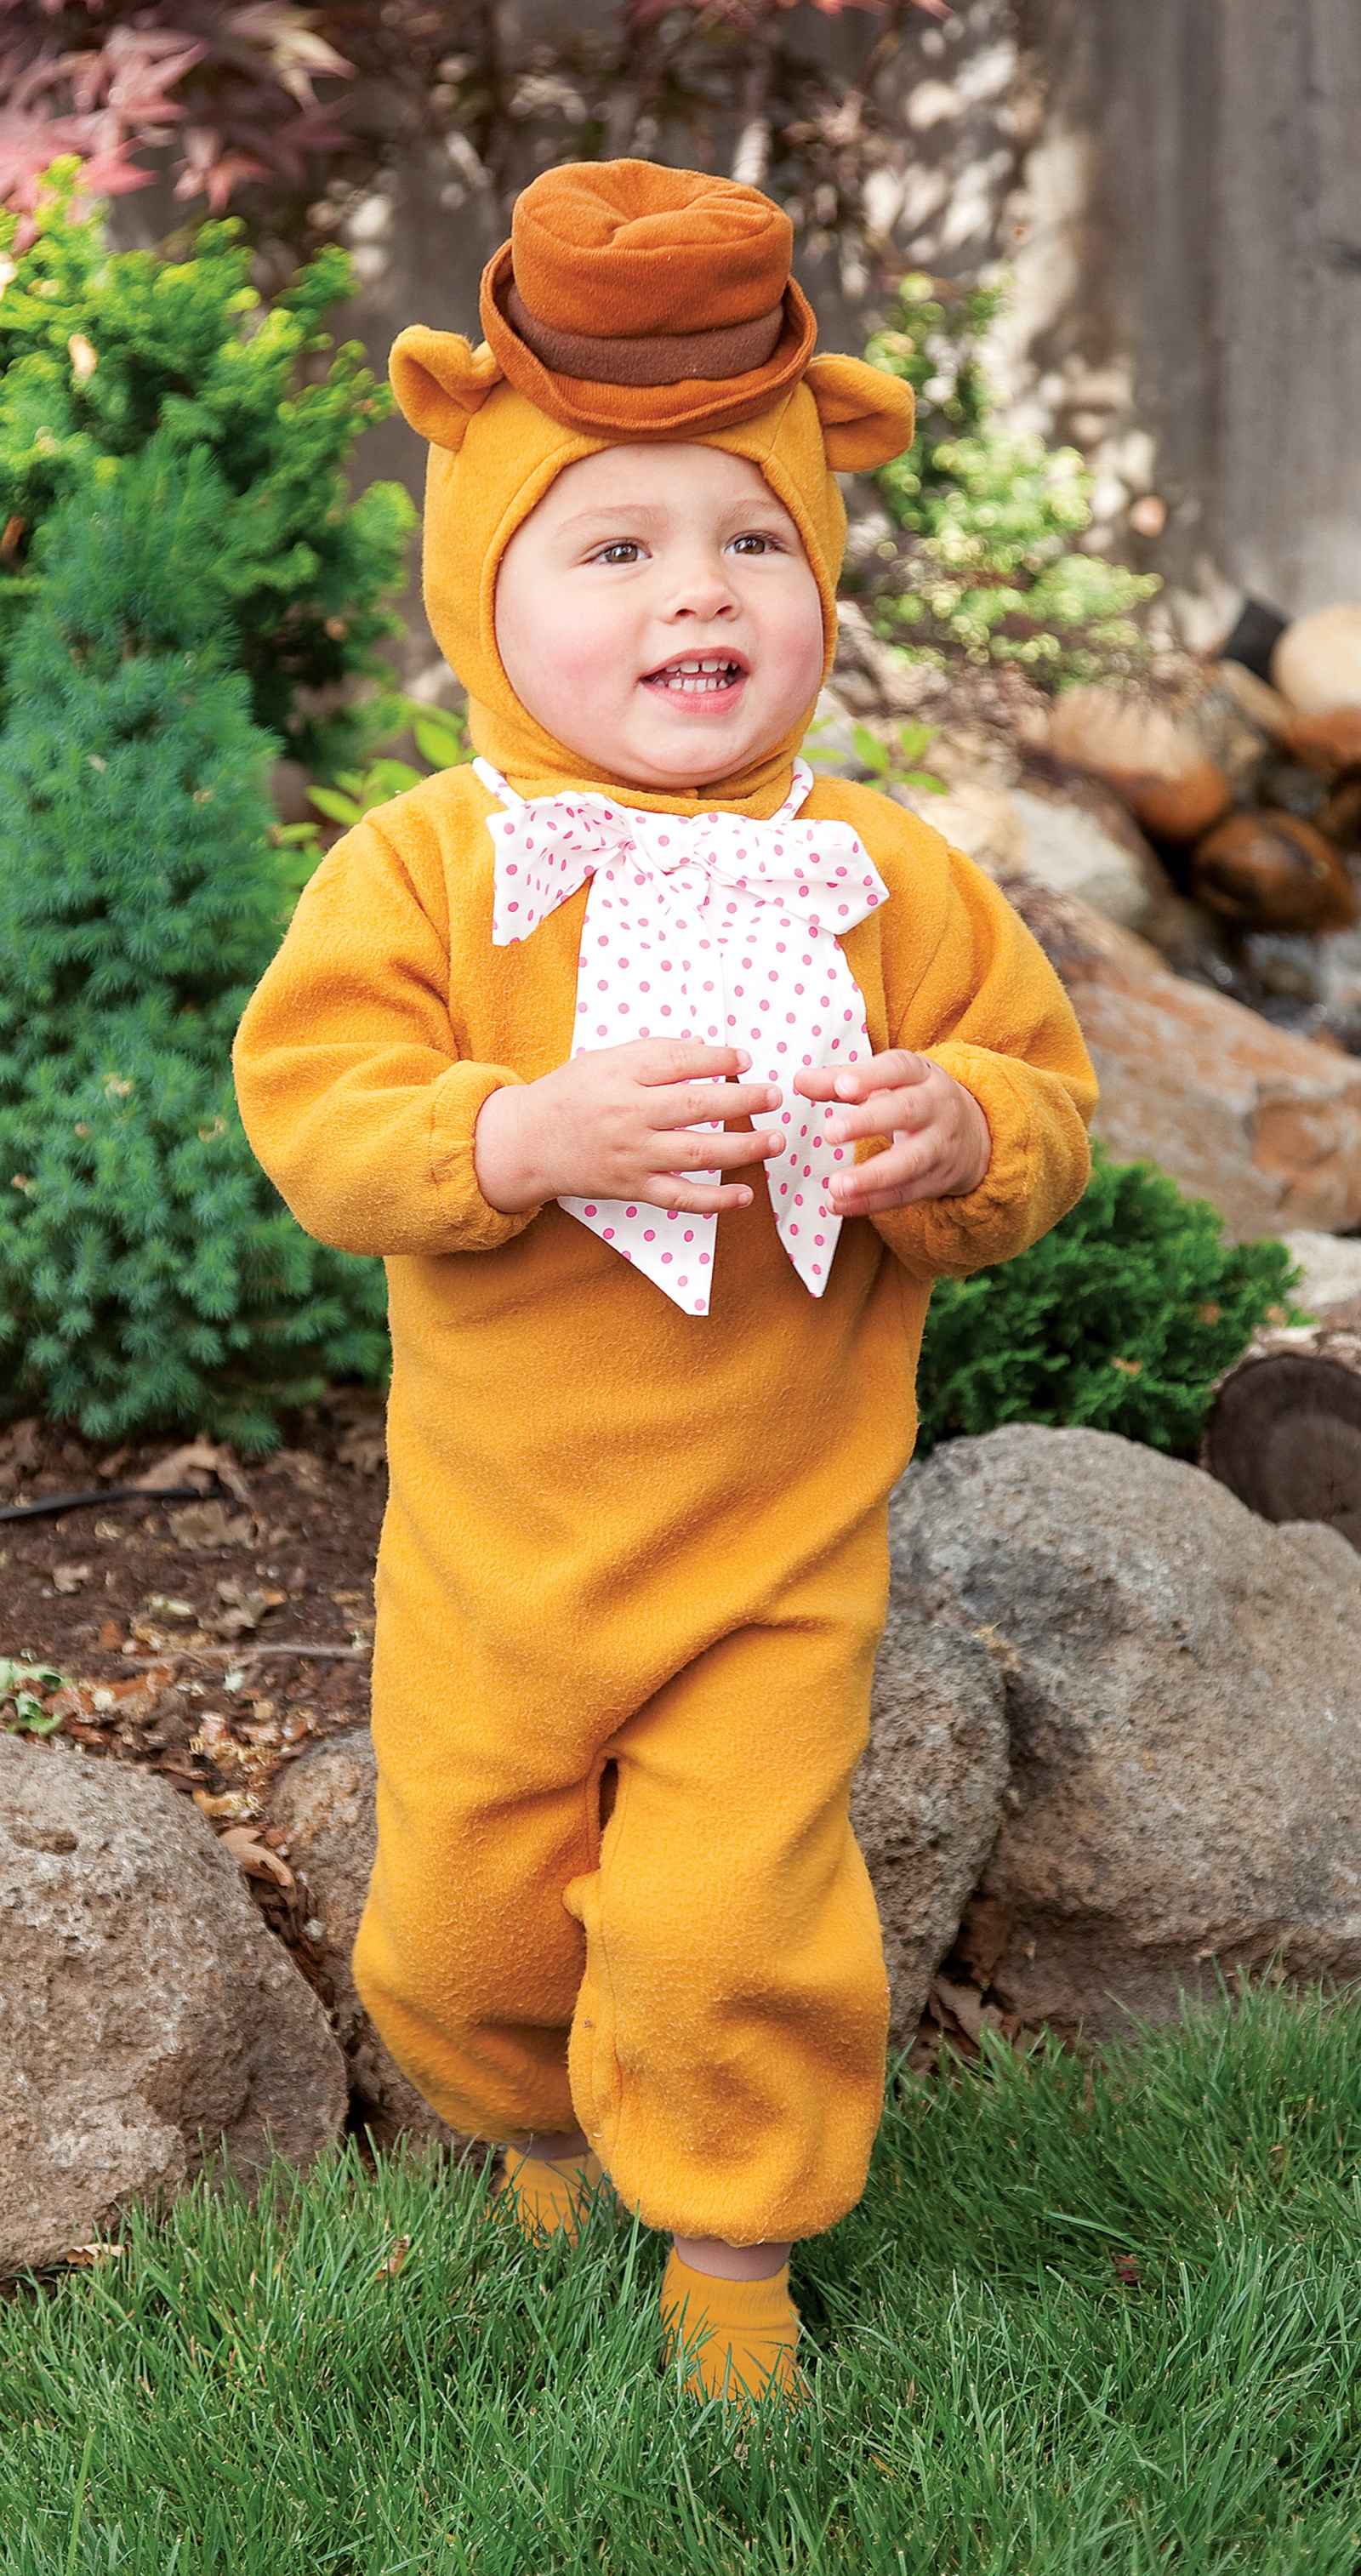 The Muppets – Fozzie Bear Toddler Costume